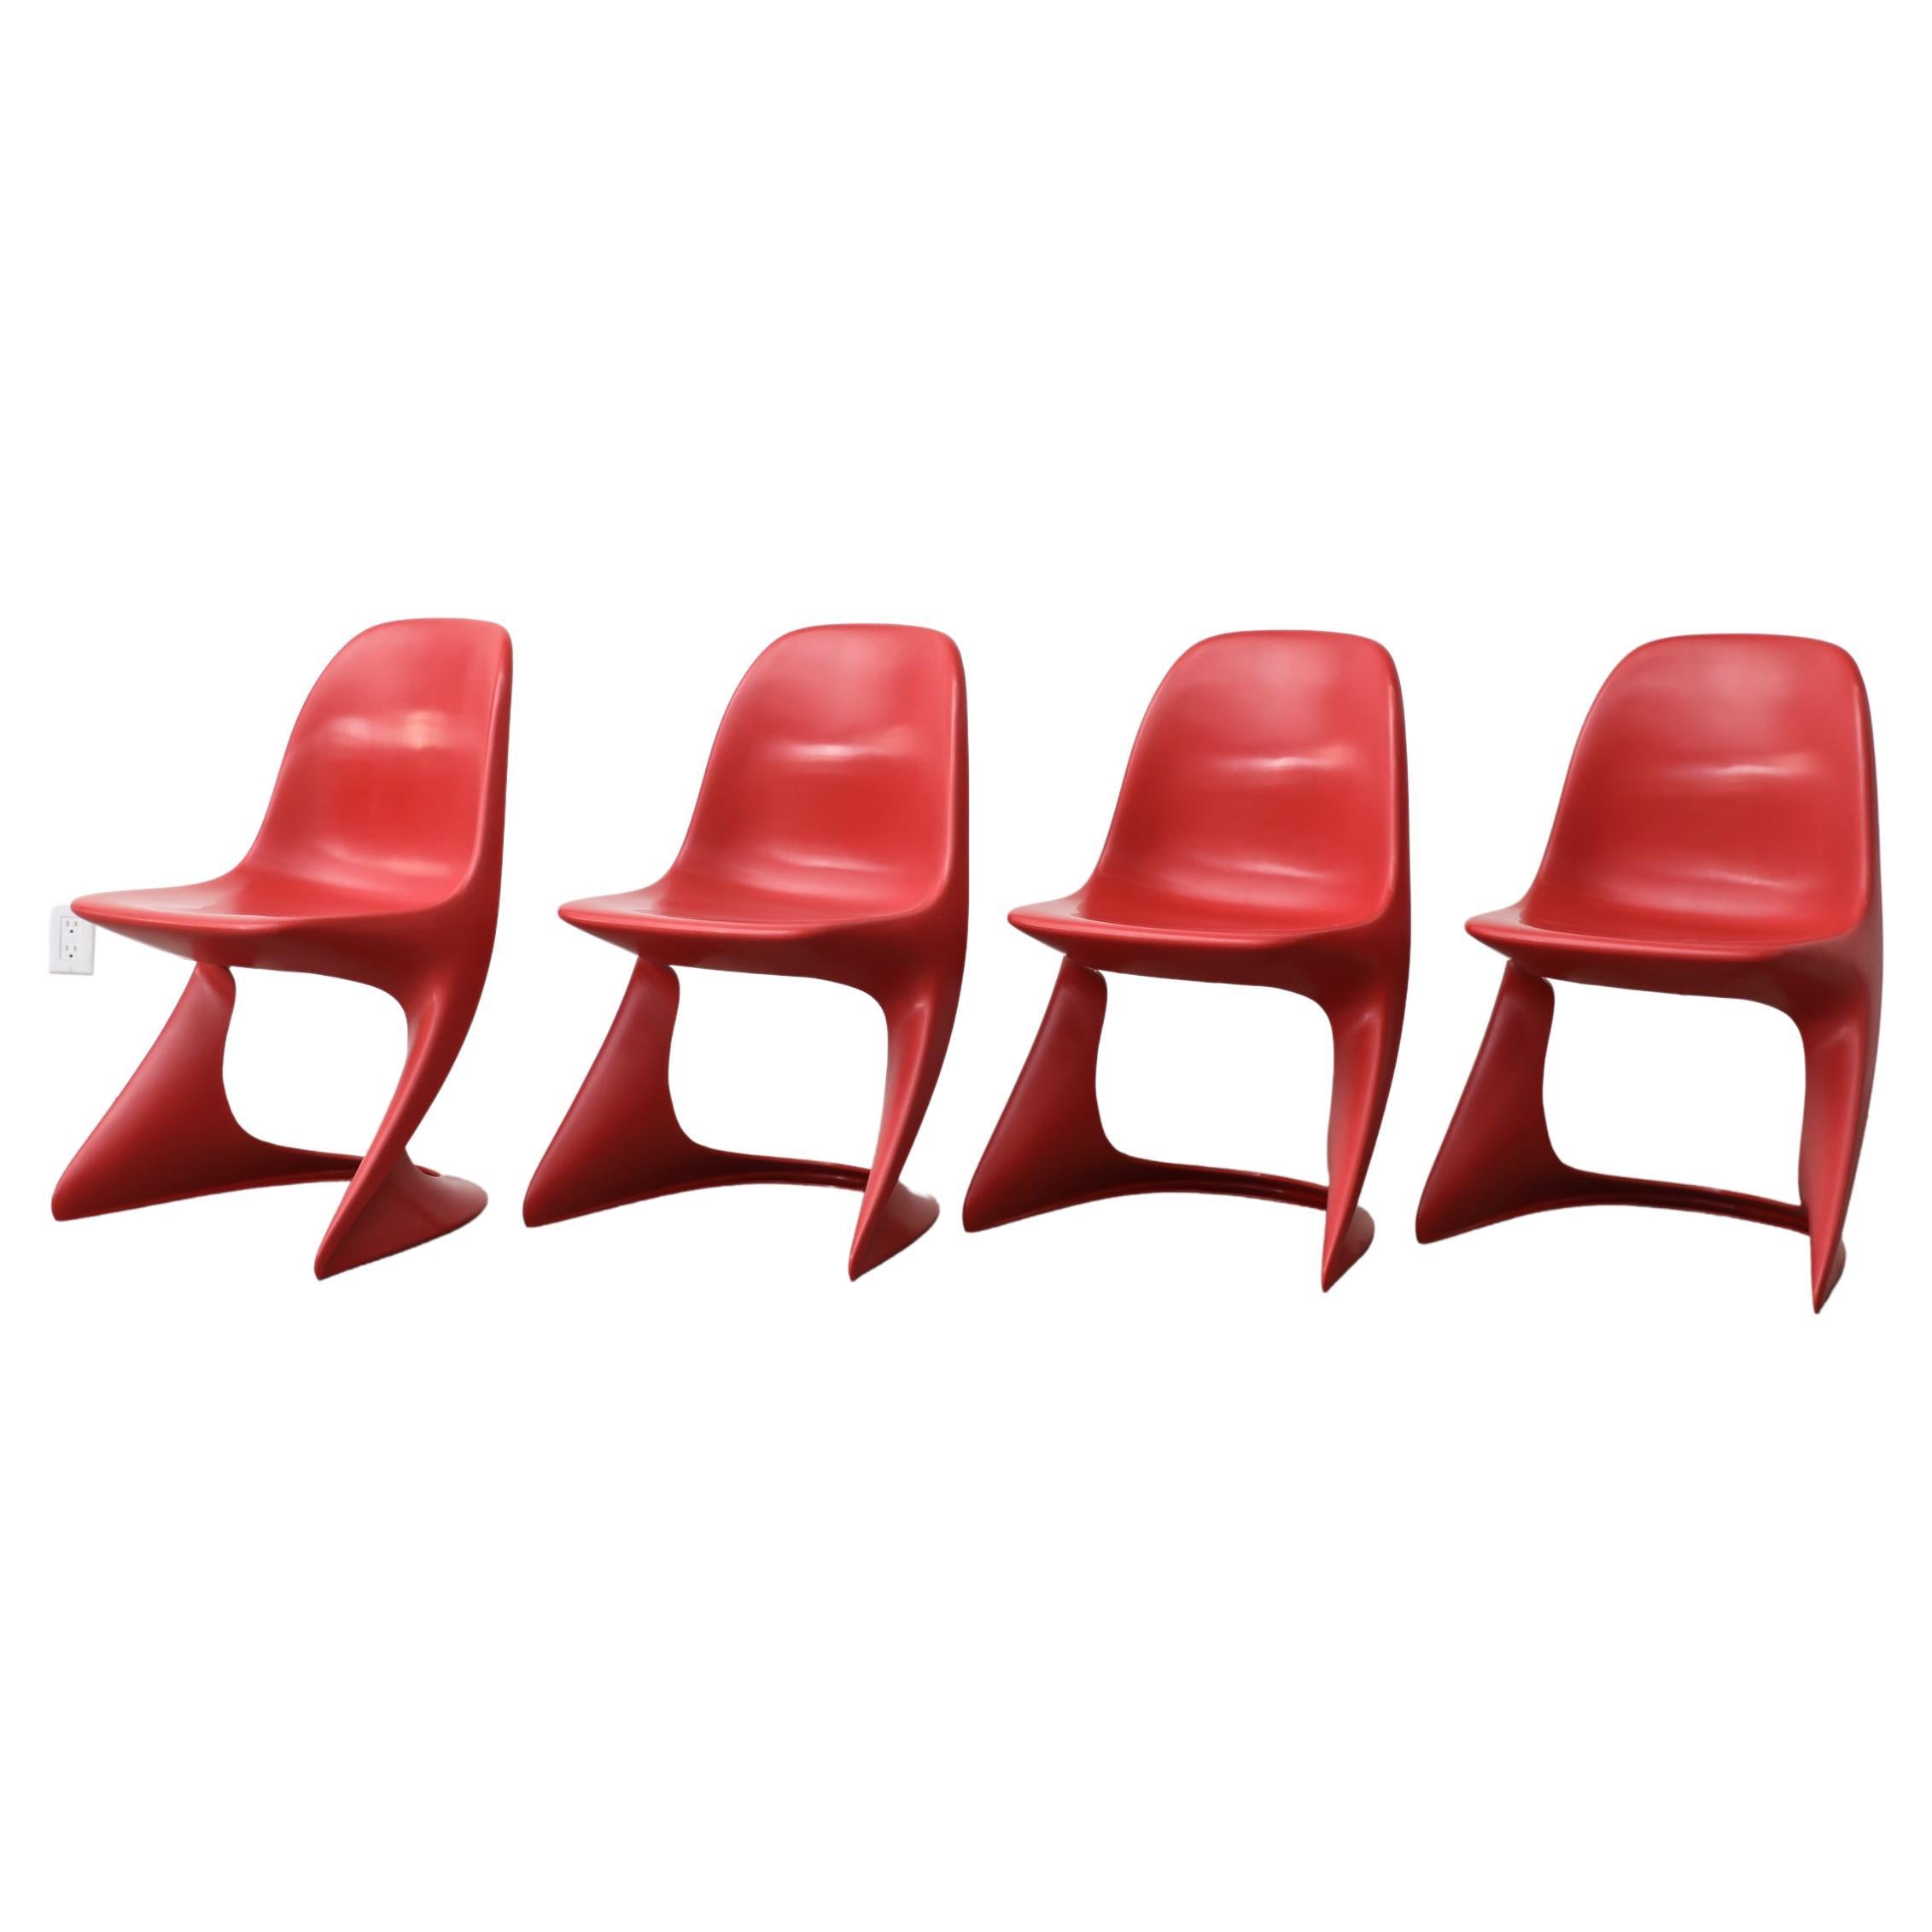 Set of 4 Space Age Stacking Child Sized Red Casalino Chairs by Alexander Begge For Sale